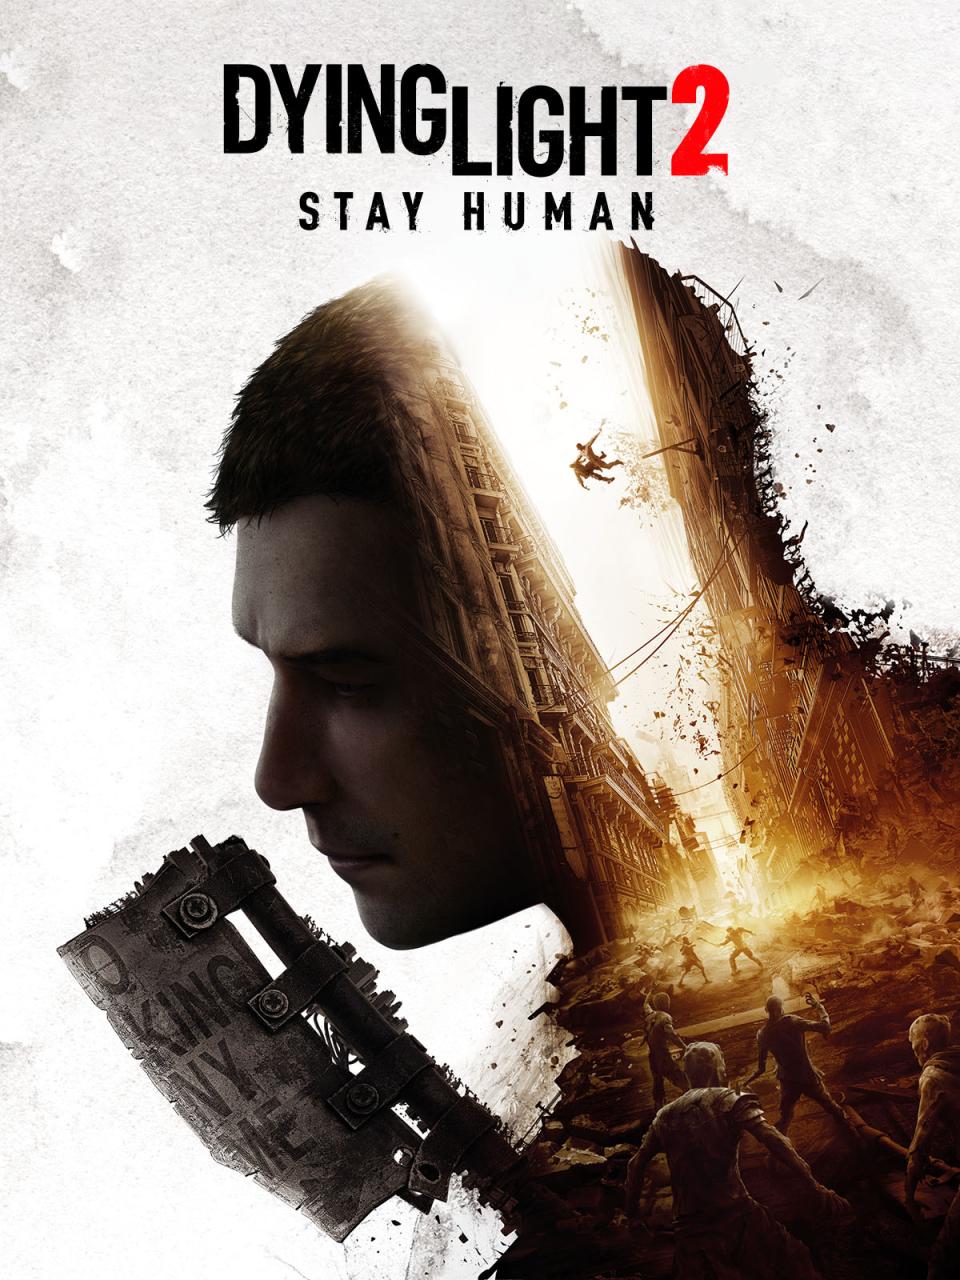 Dying Light 2 Stay Human | Download And Buy Today - Epic Games Store